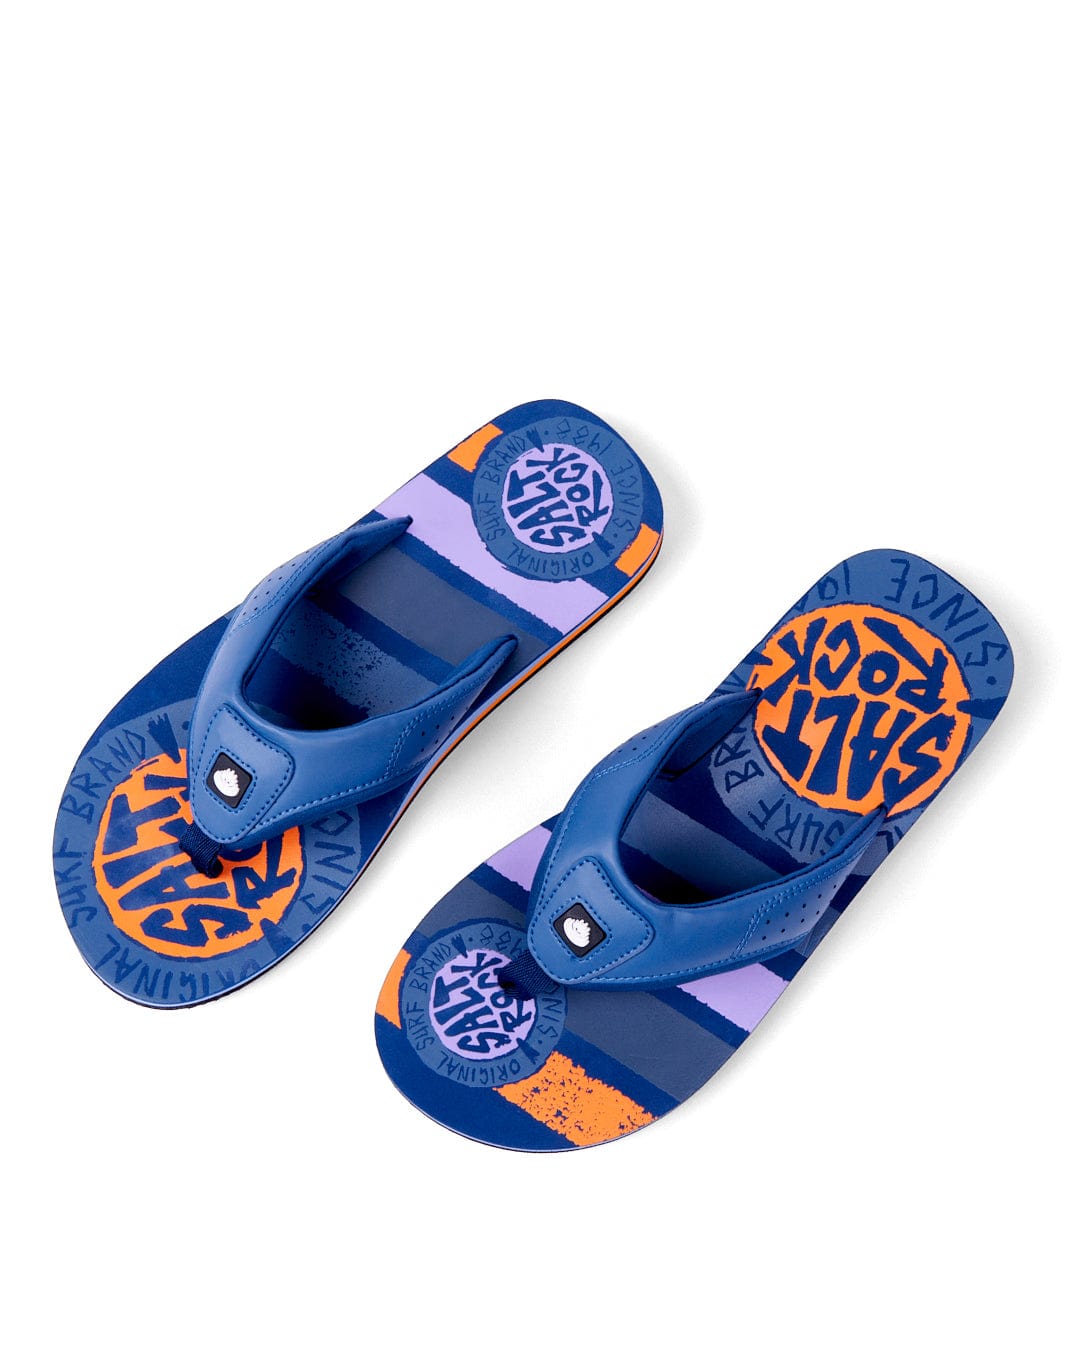 A pair of blue and orange flip flops with Saltrock branding on the insoles, positioned on a white background.